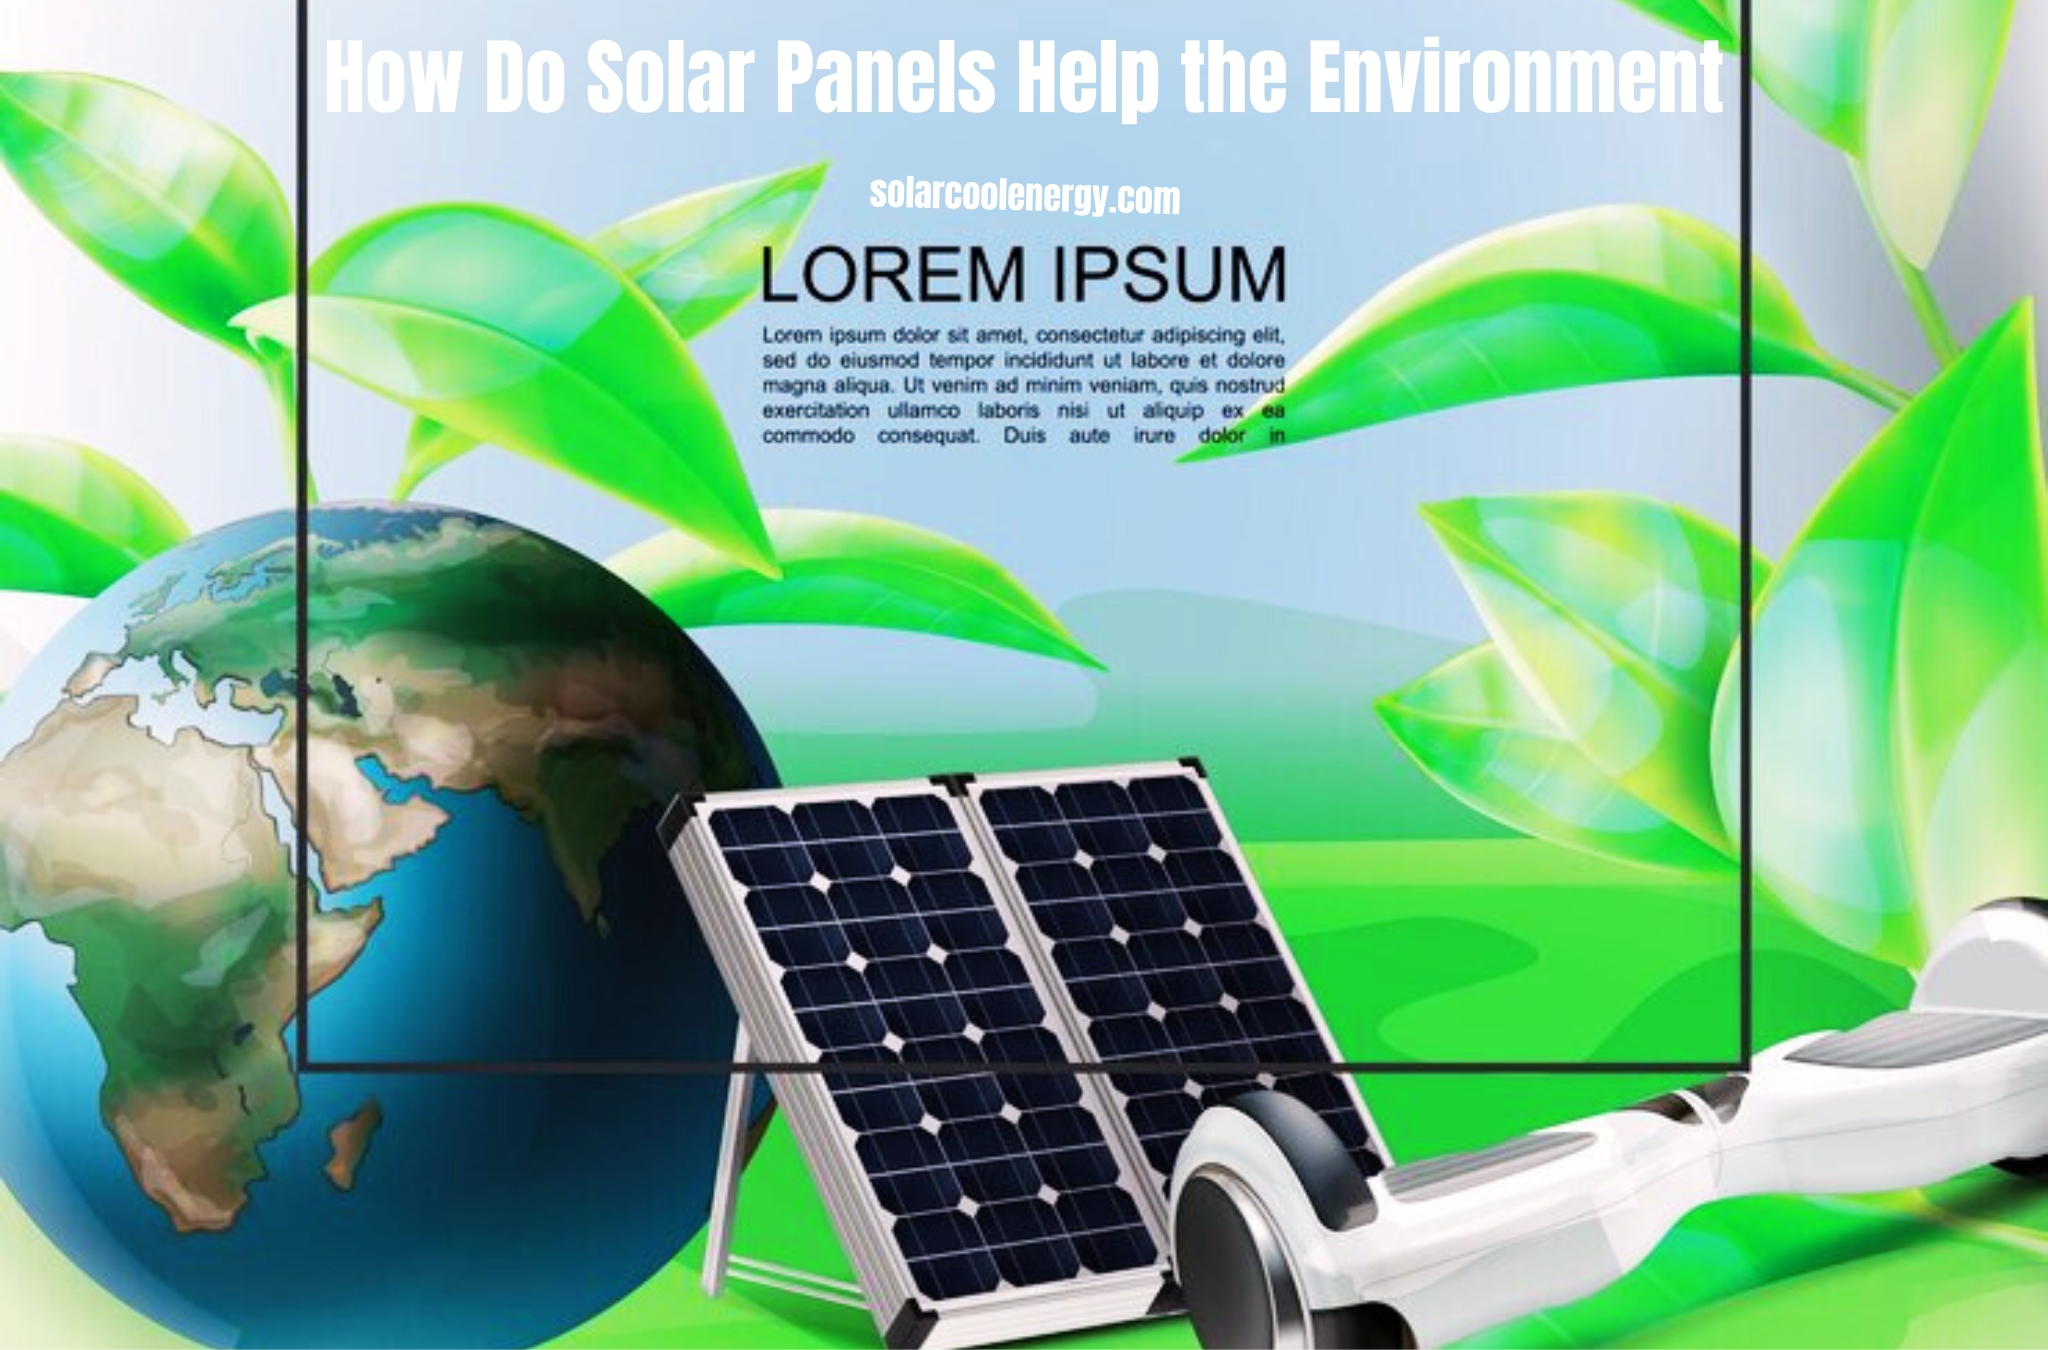 How Do Solar Panels Help the Environment